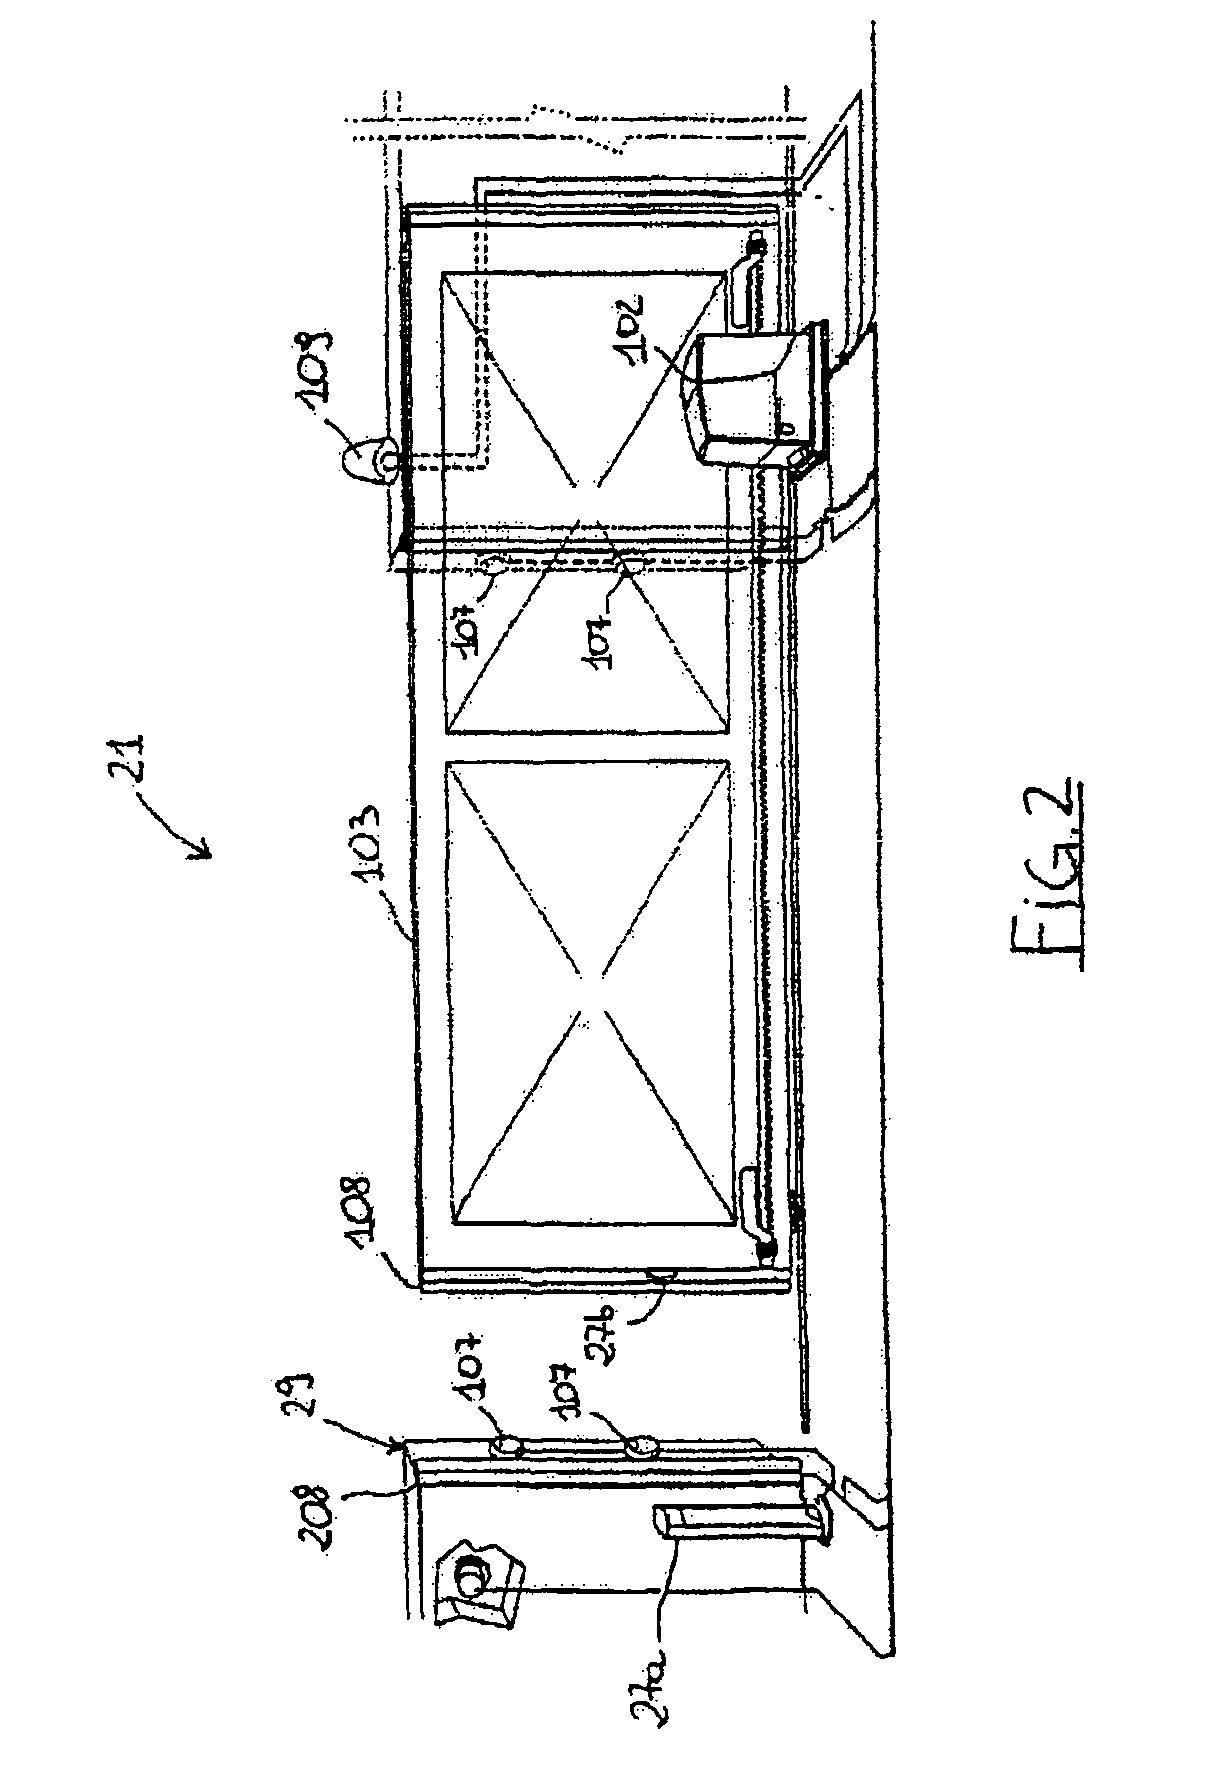 Method and device for automatic systems designed to operate movable barriers